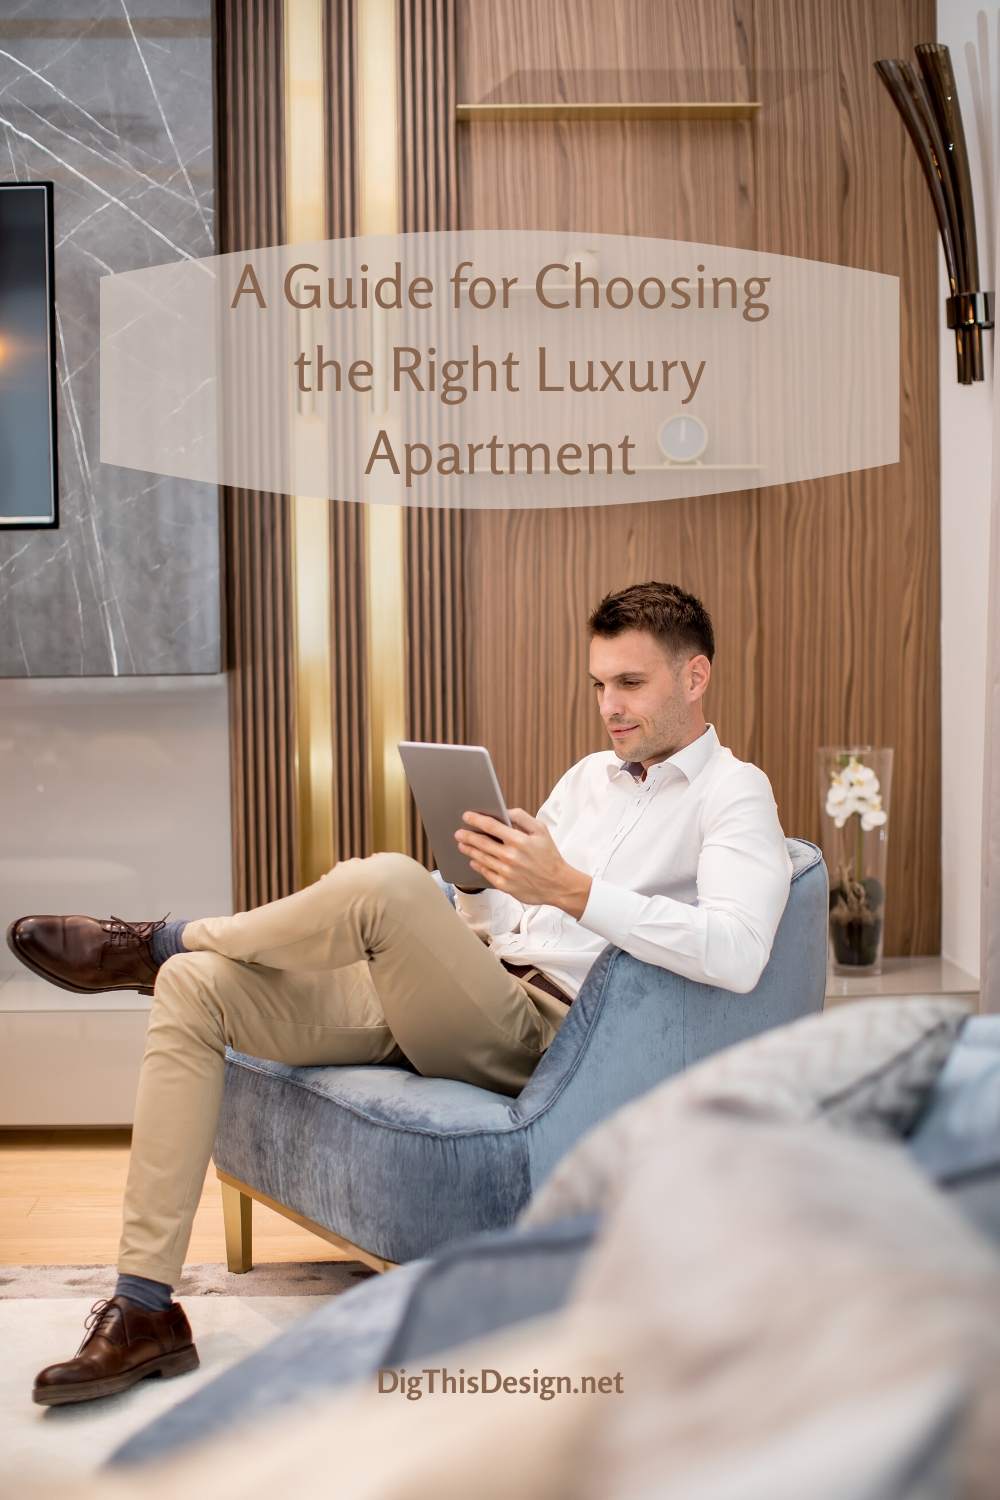 What To Look For In a Luxury Apartment